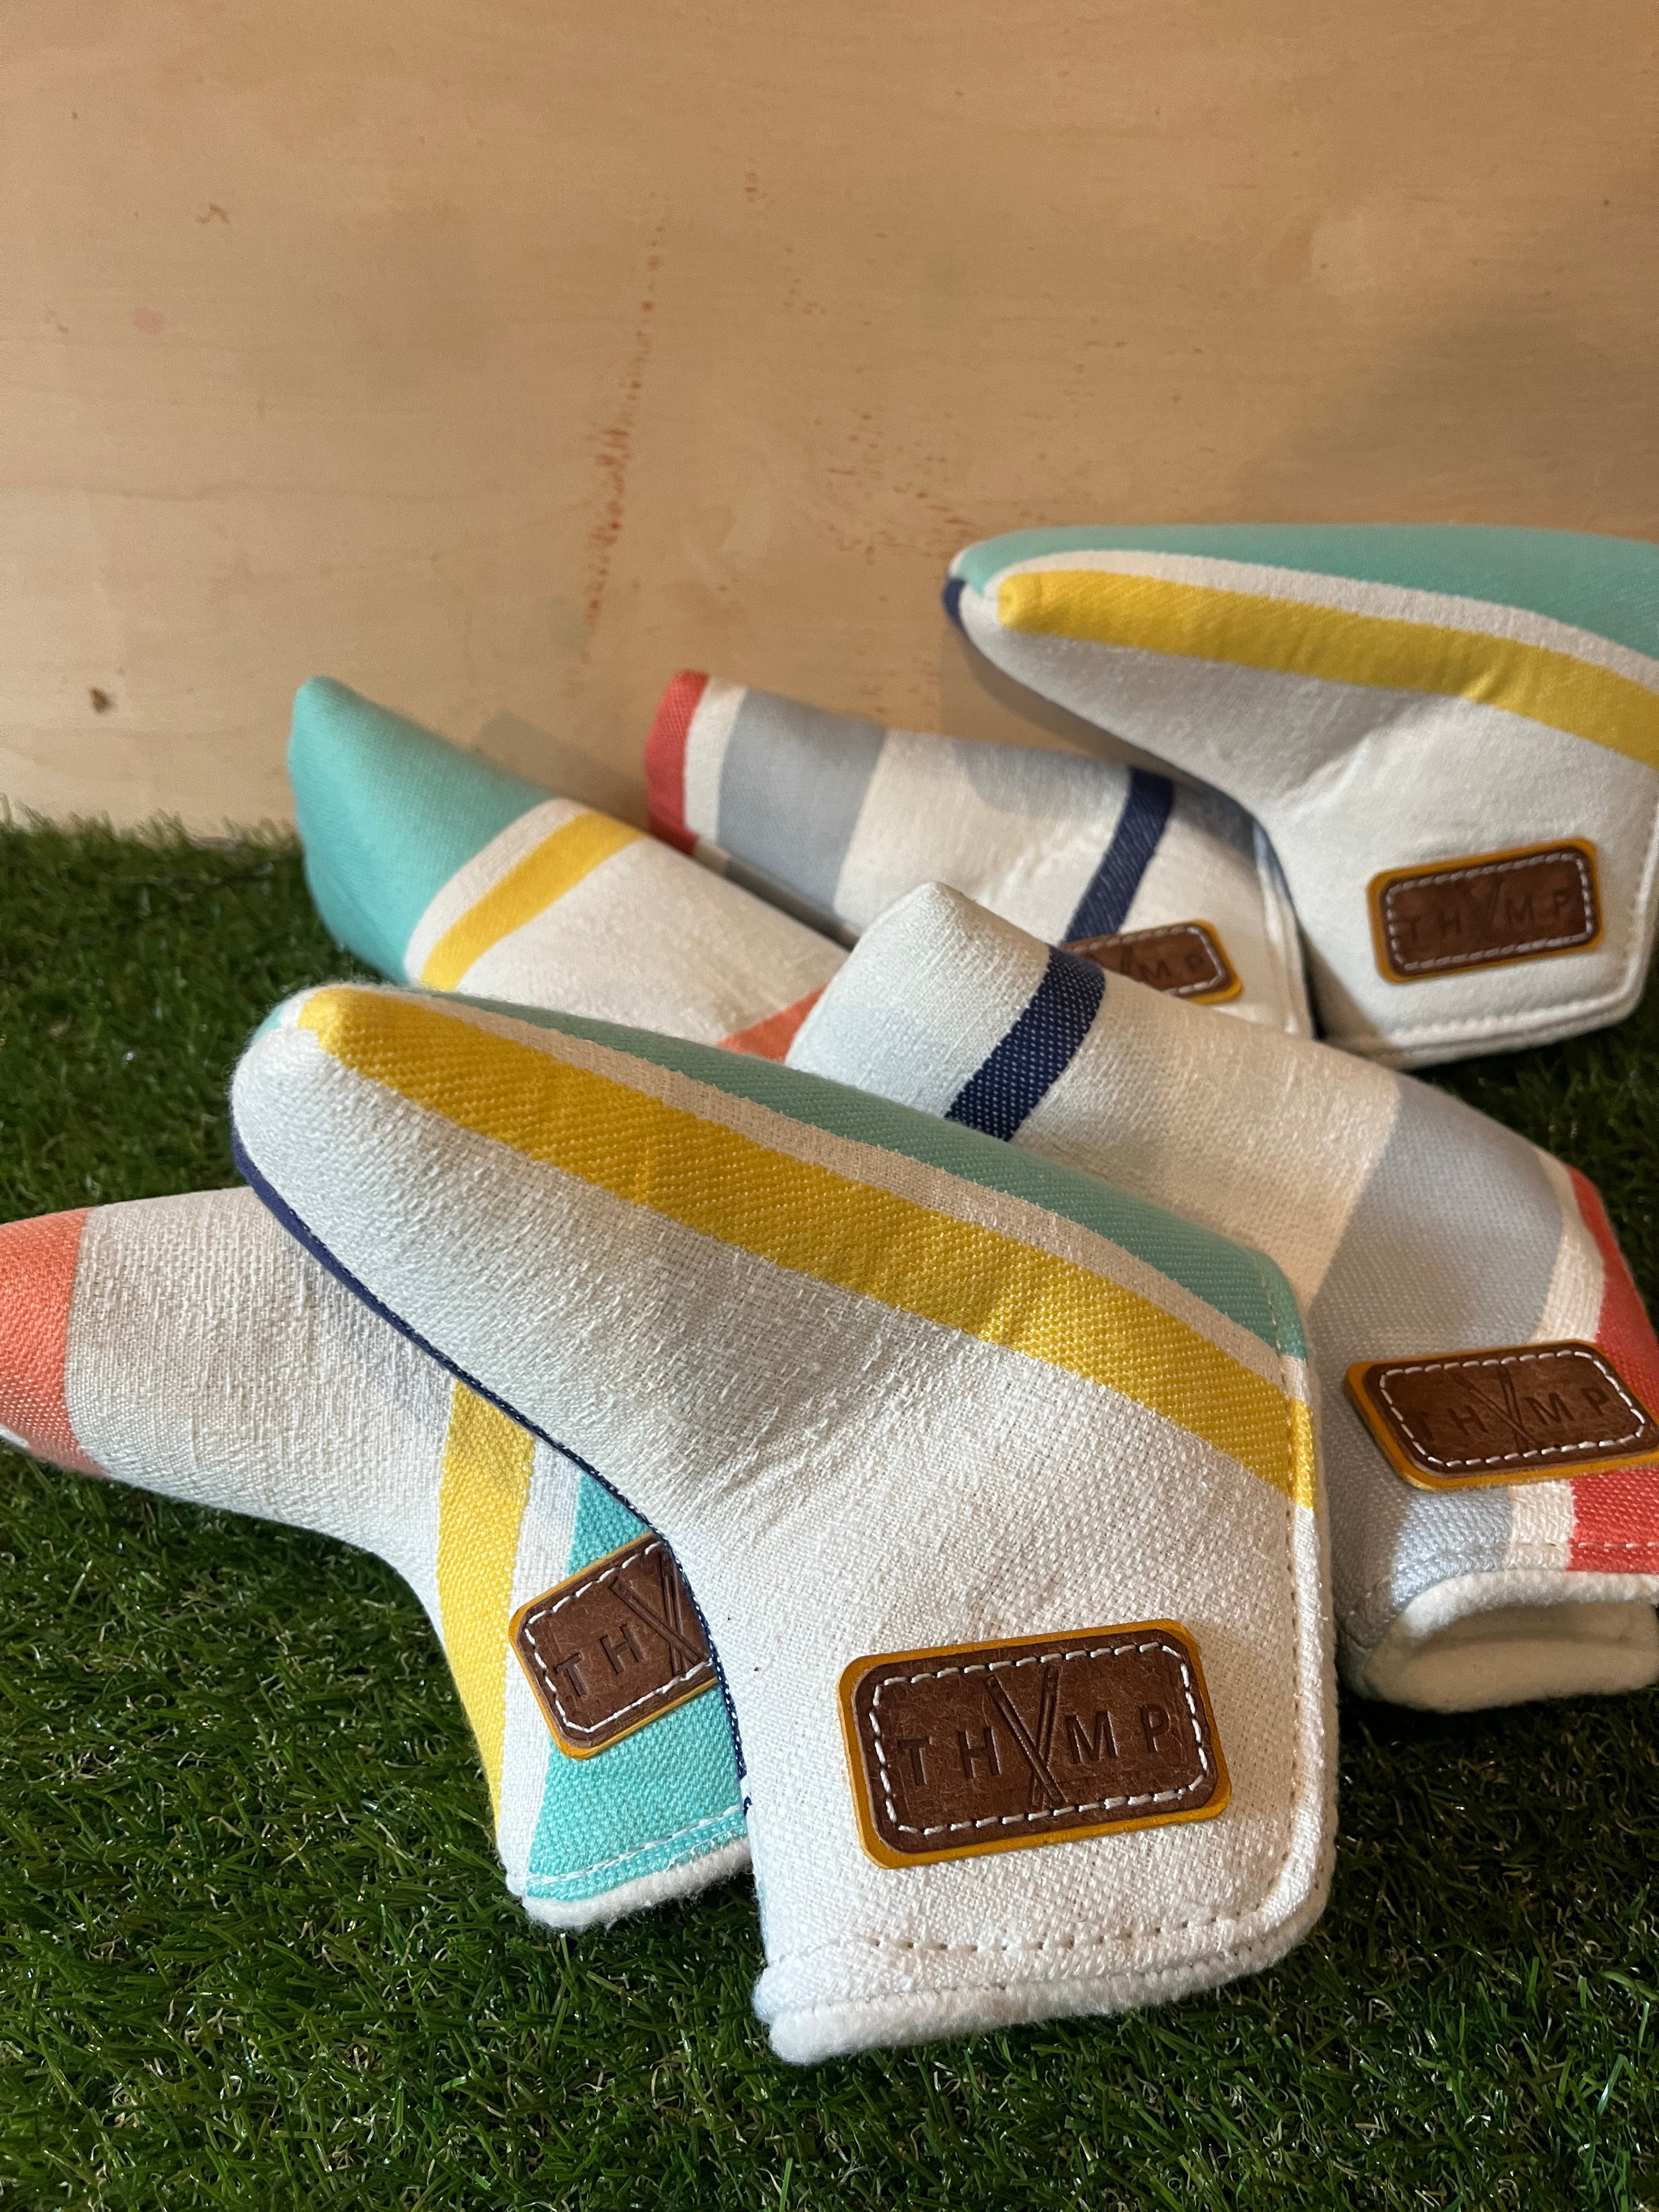 THVMP Putter Covers